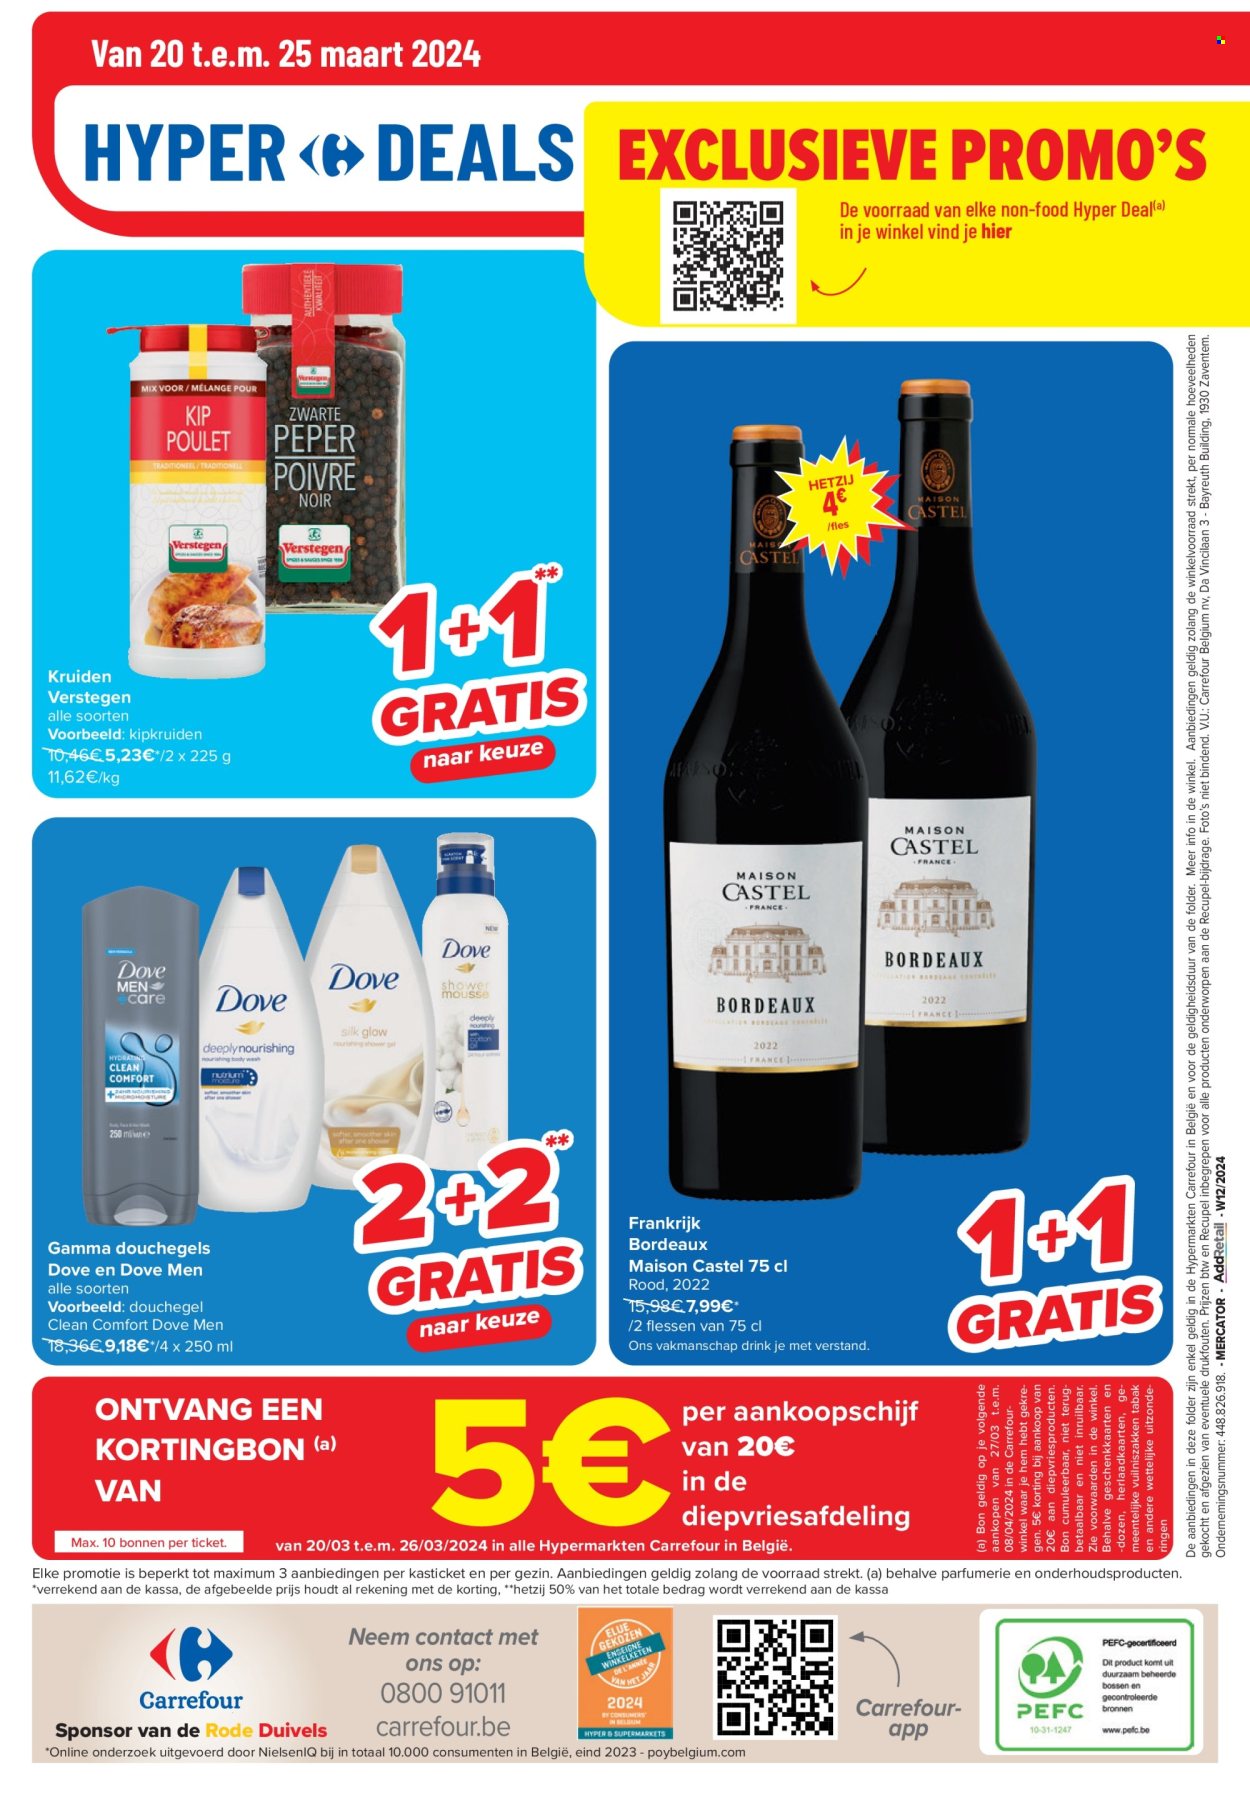 Catalogue Carrefour hypermarkt - 20.3.2024 - 2.4.2024. Page 40.